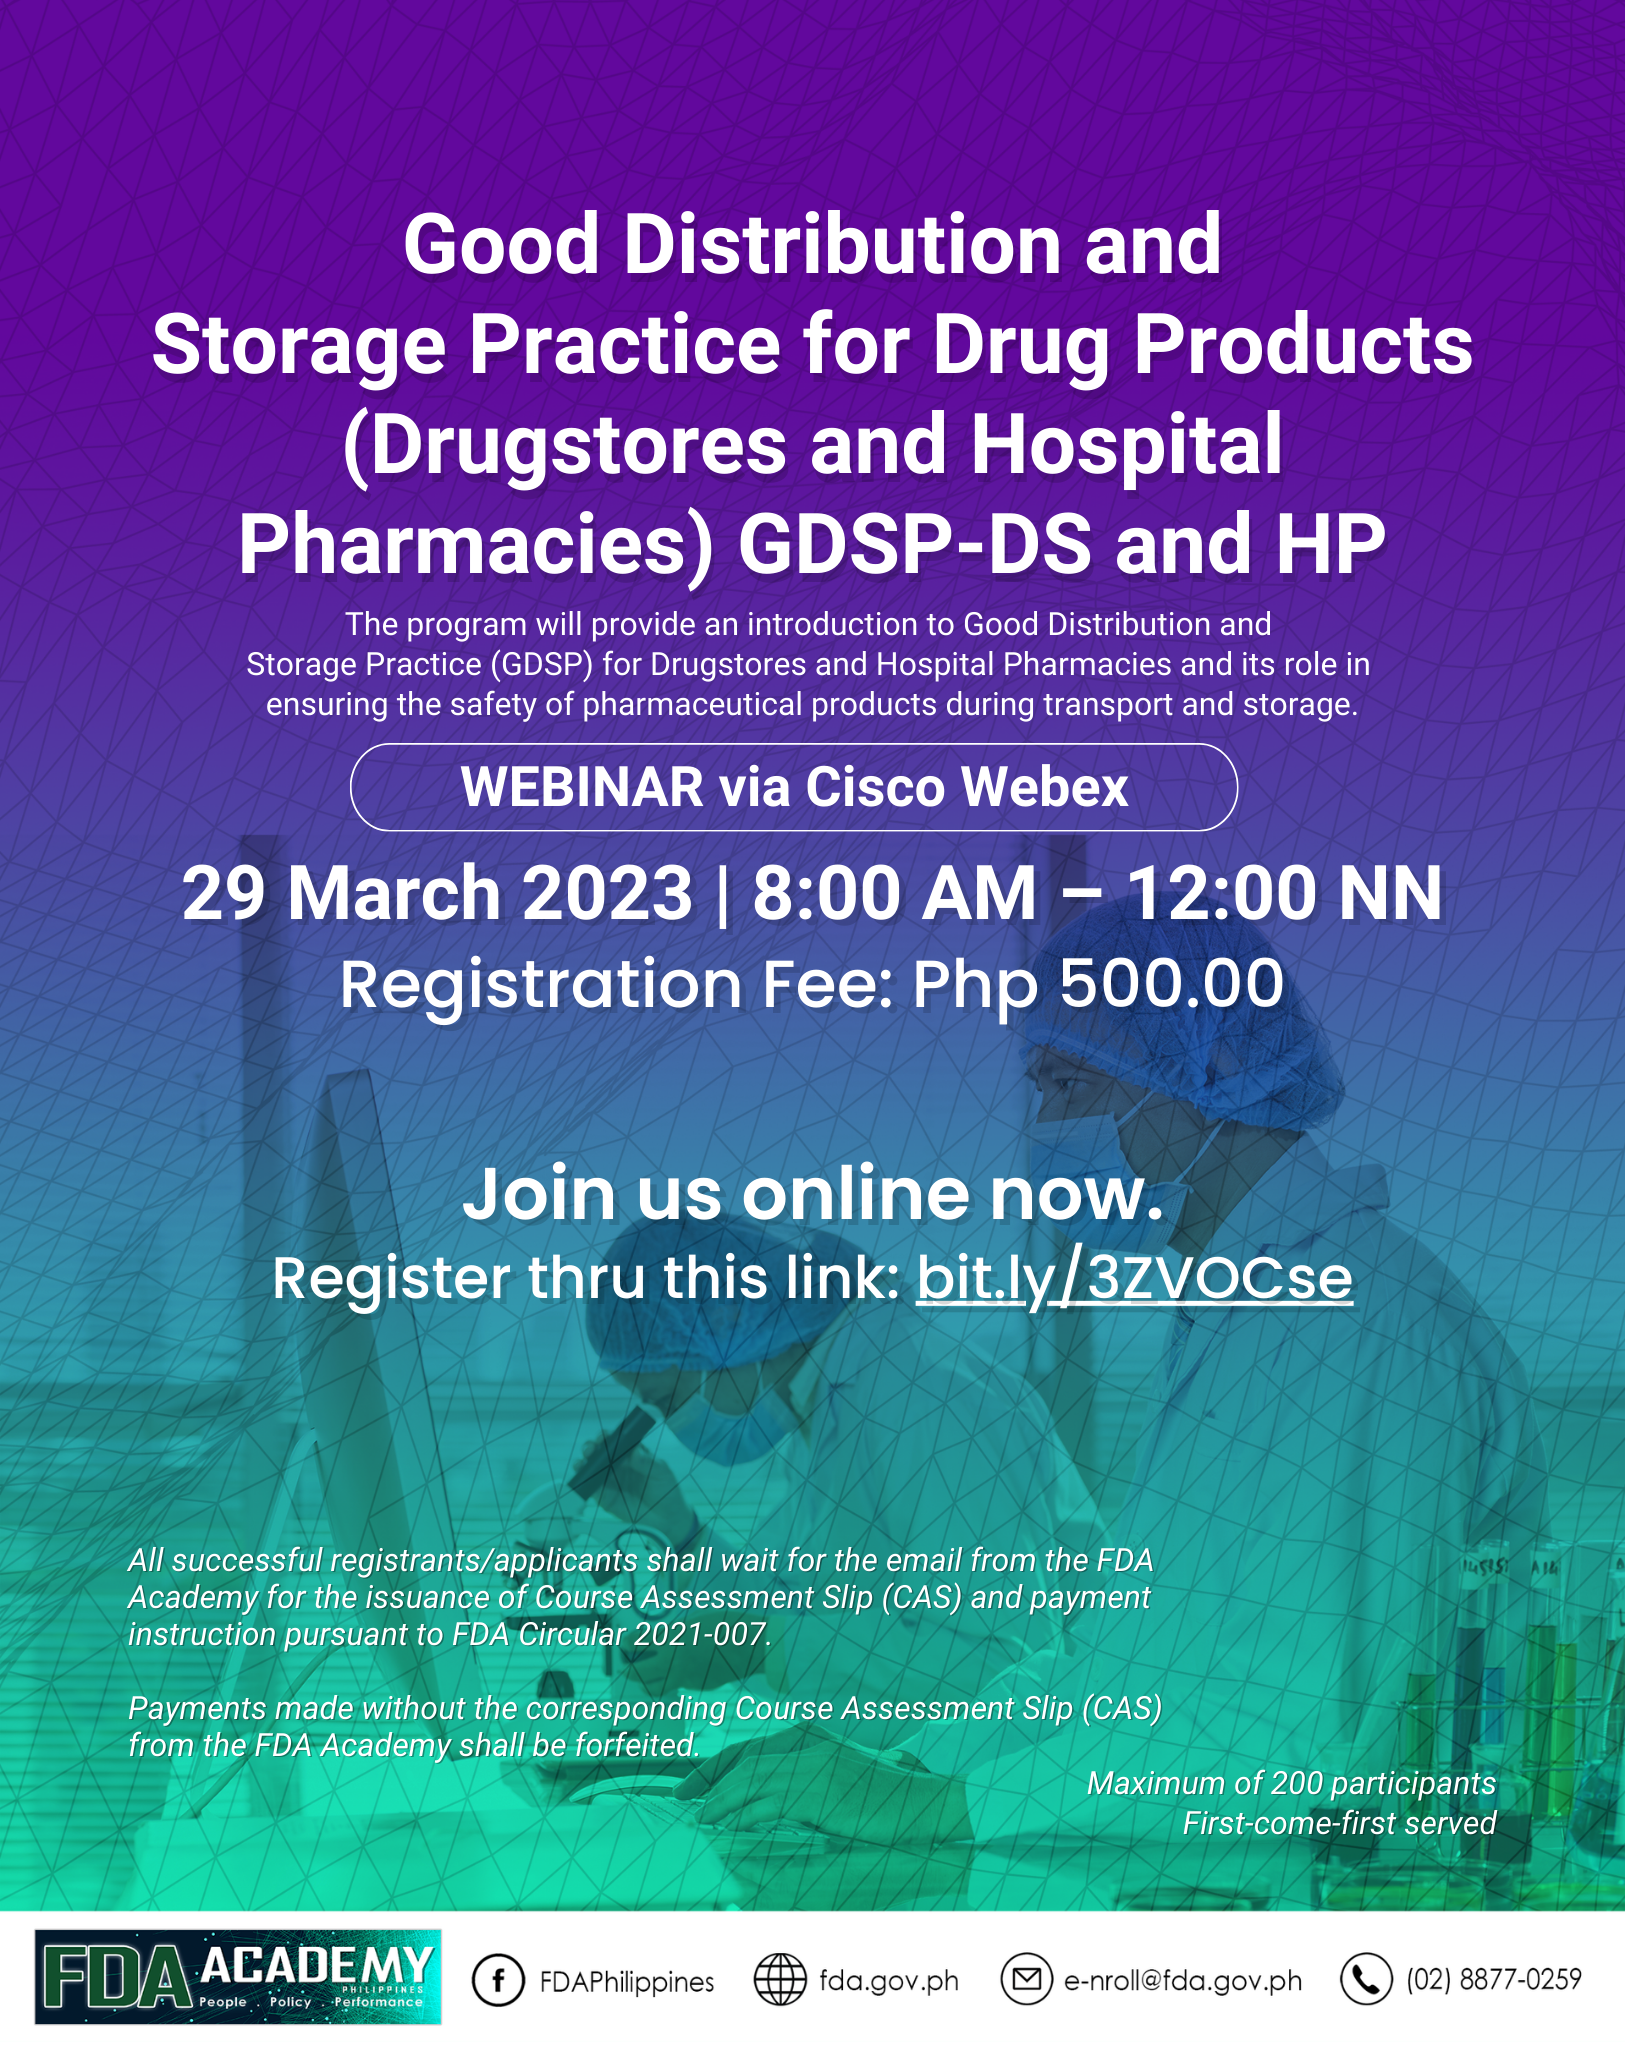 GOOD DISTRIBUTION AND STORAGE PRACTICE FOR DRUG PRODUCTS (DRUGSTORES AND HOSPITAL PHARMACIES) GDSP-DS AND HP